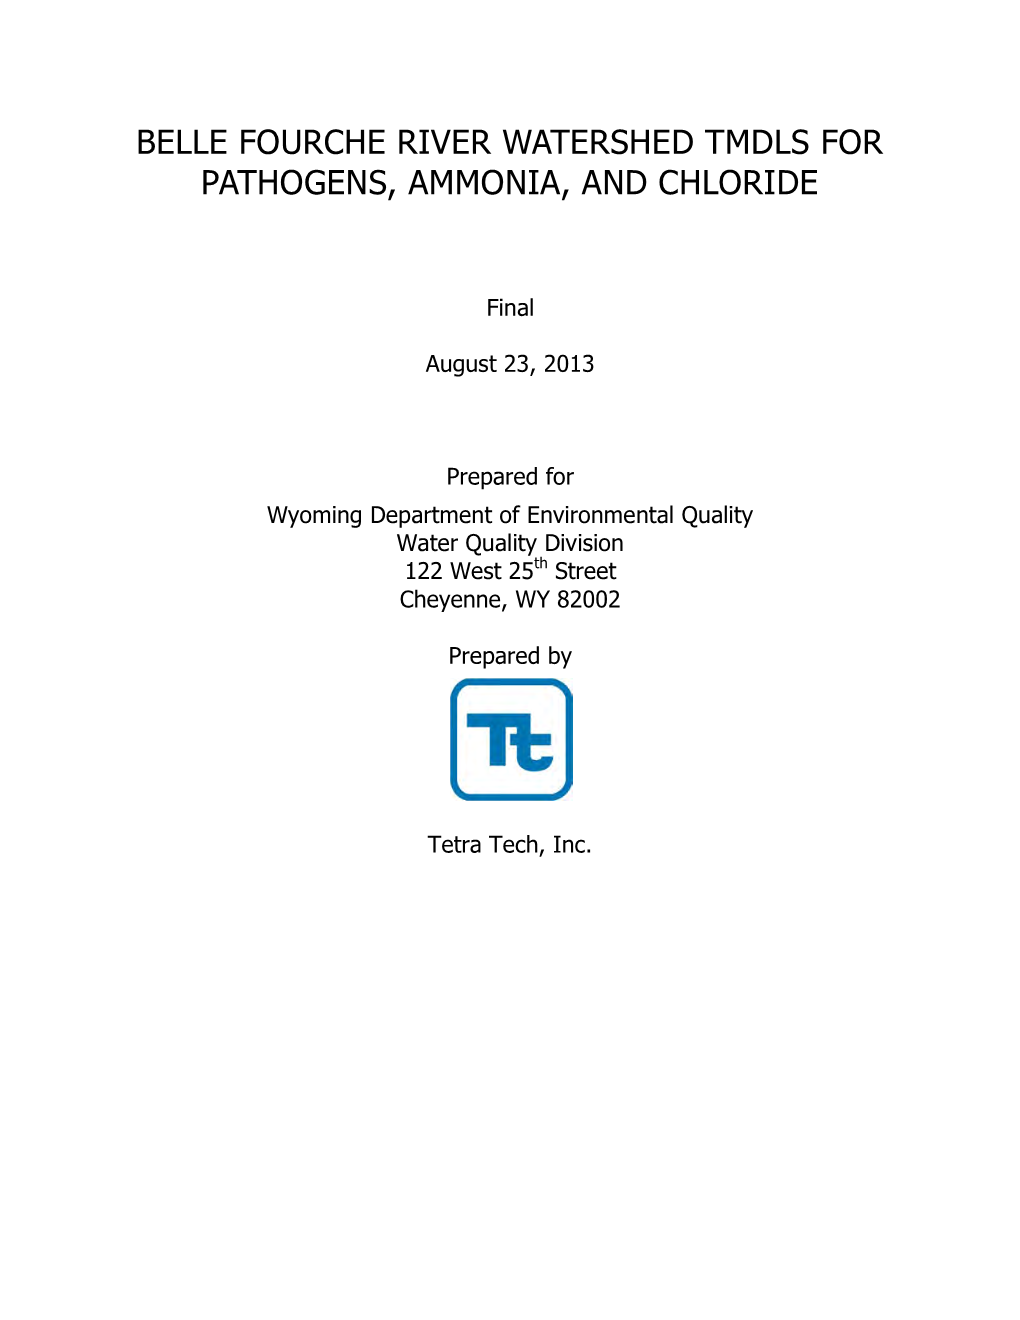 Belle Fourche River Watershed Tmdls for Pathogens, Ammonia, and Chloride